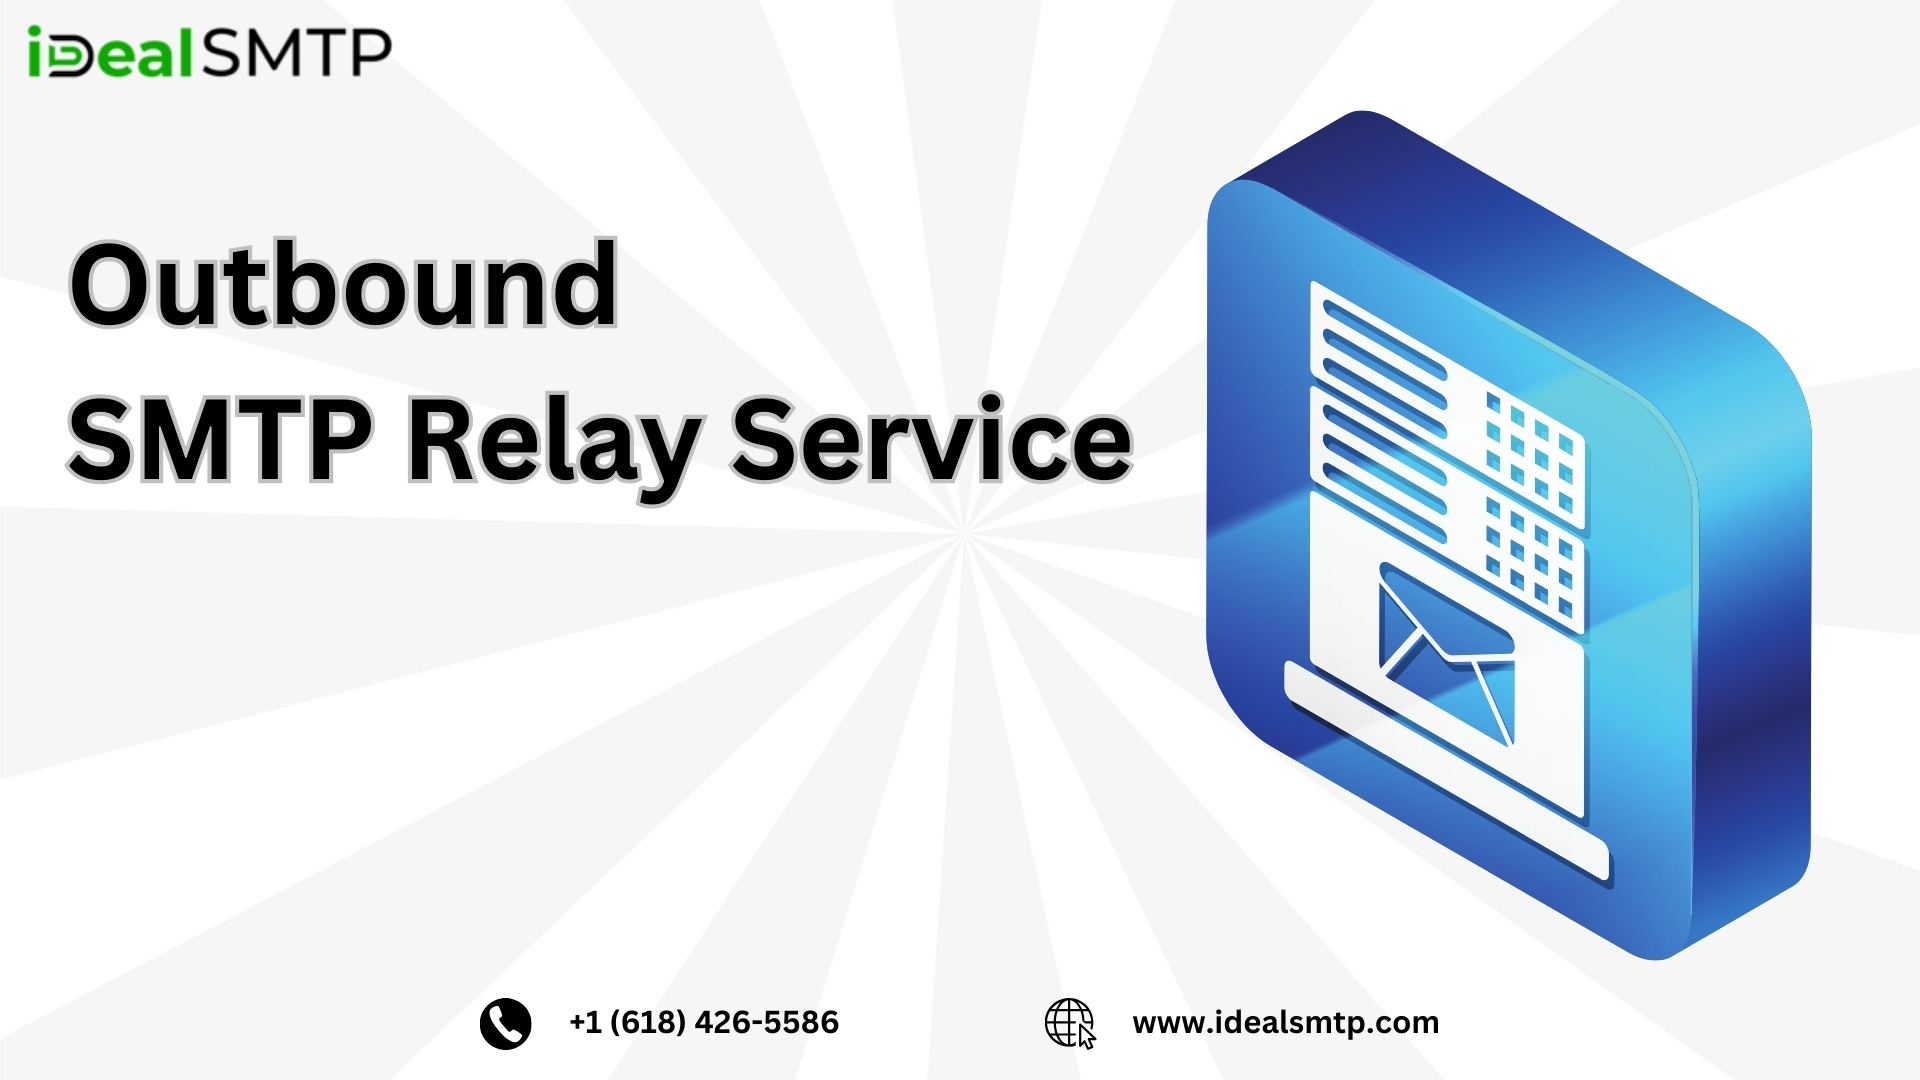 Exploring the Benefits of iDealSMTP as Your Outbound SMTP Relay Service